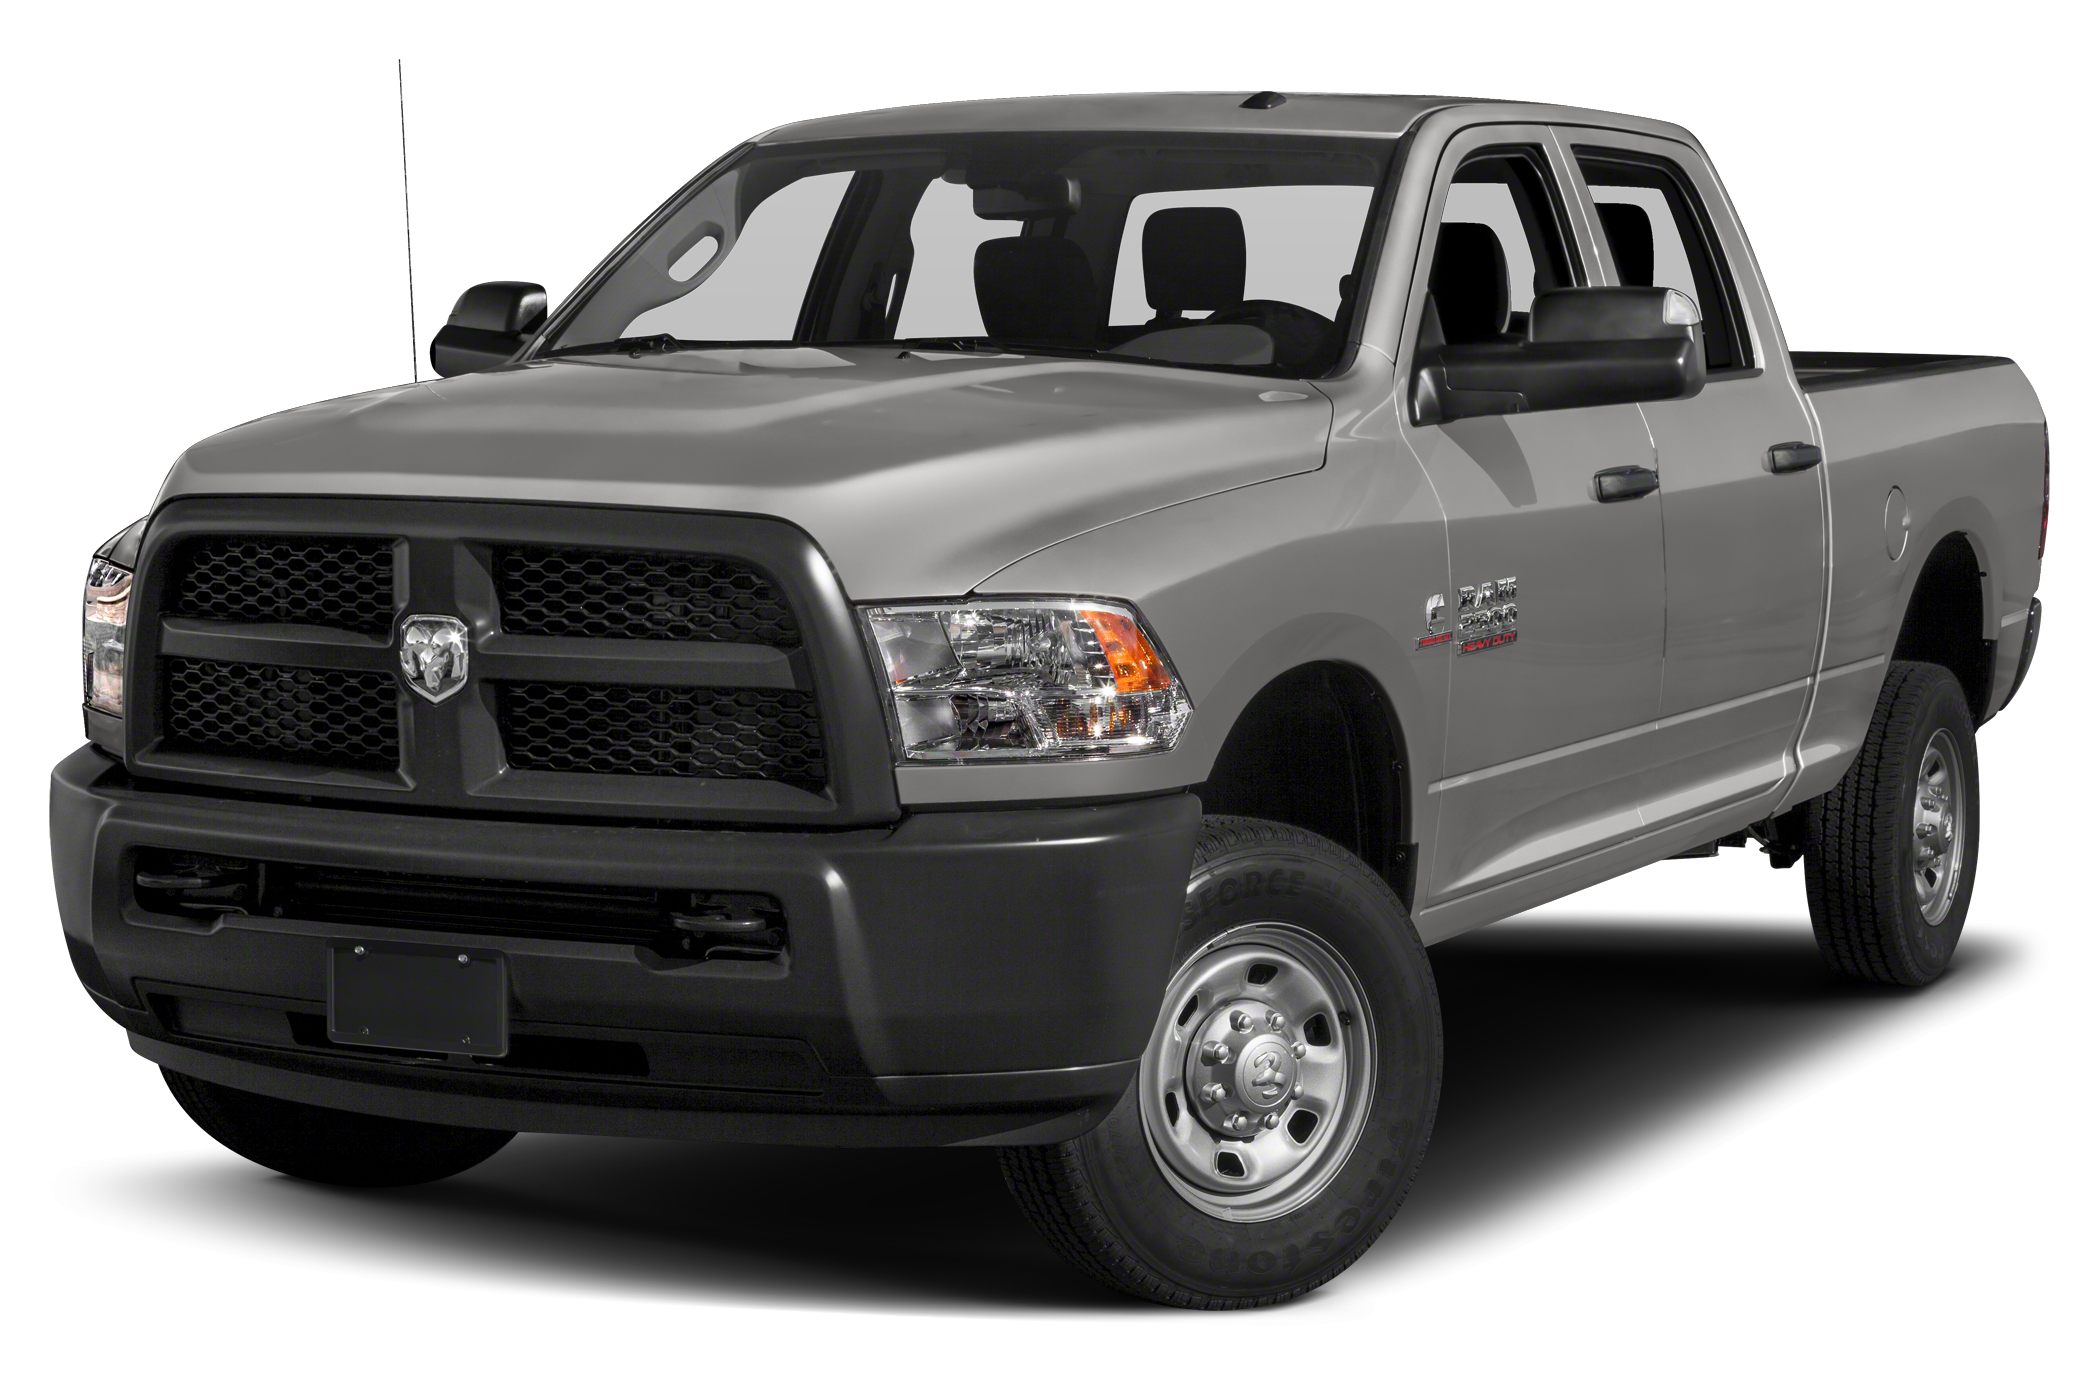 2016 Ram 2500 Tradesman 4x4 Crew Cab 149 In Wb Pictures